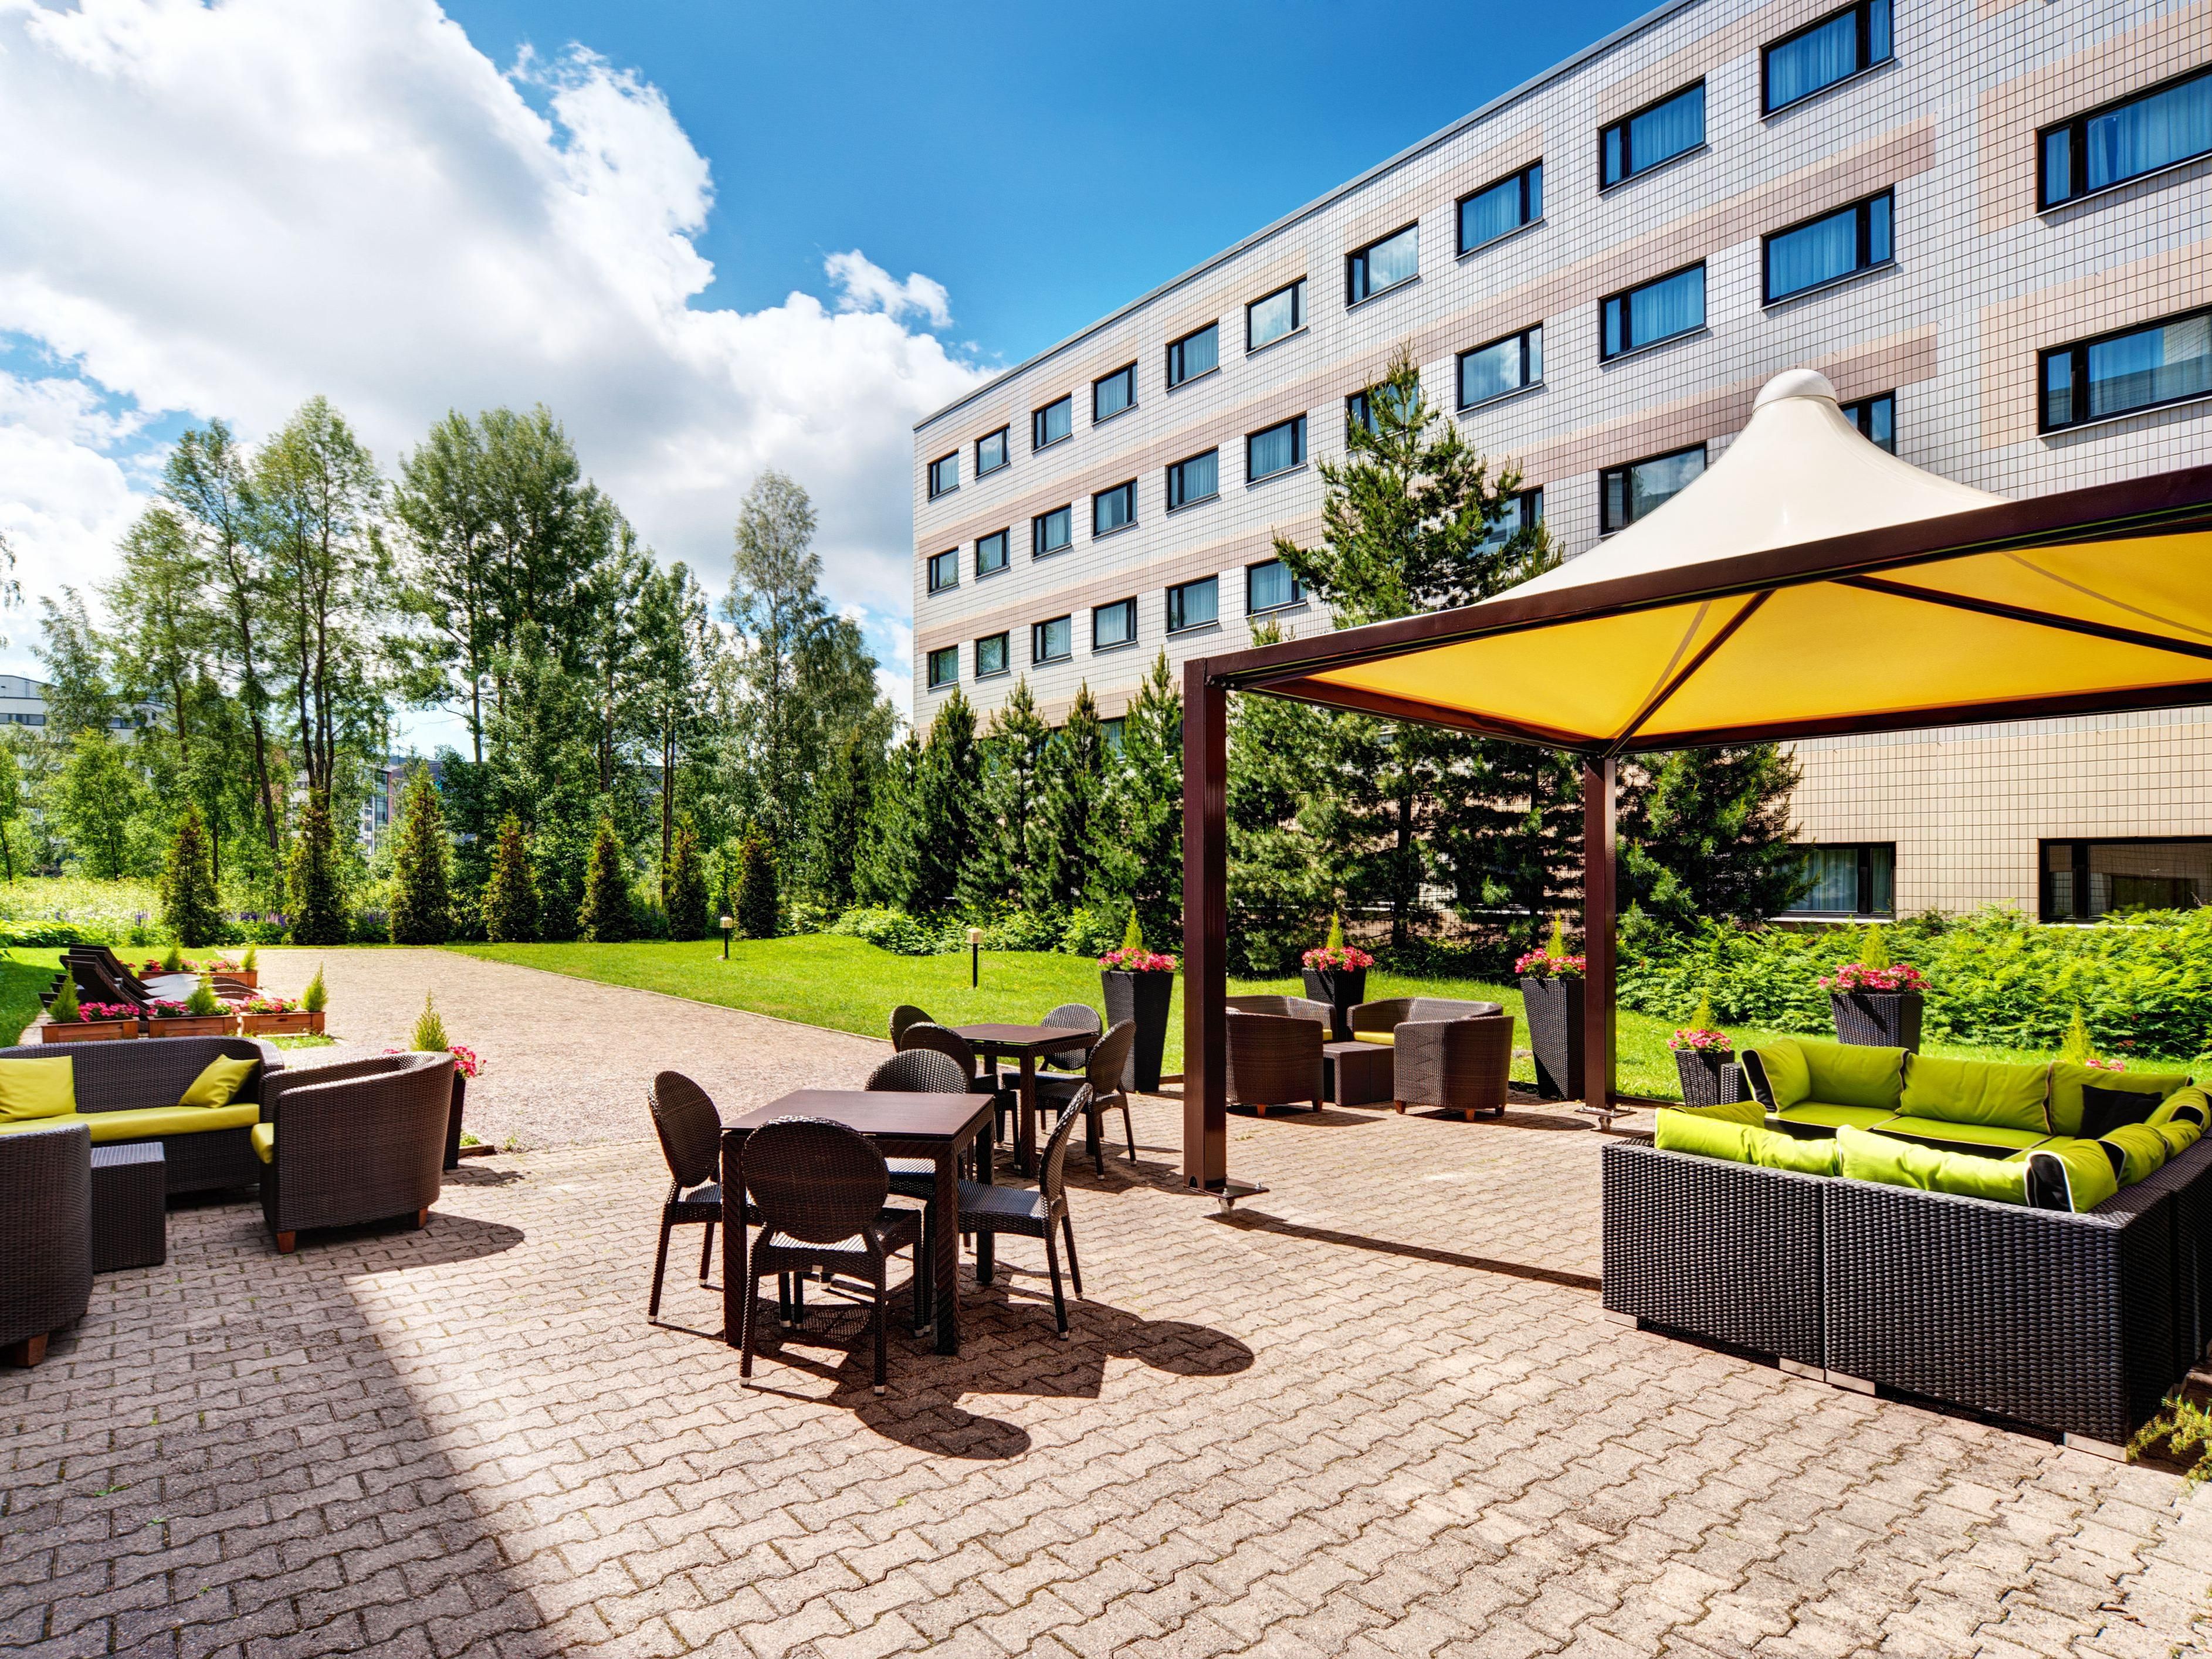 Holiday Inn Helsinki-Vantaa Airport was granted the prestigious Nordic Swan Ecolabel in November, 2023. Nordic Swan Ecolabel has now even more stringent criteria and it challenges companies to take a holistic approach to caring for nature.